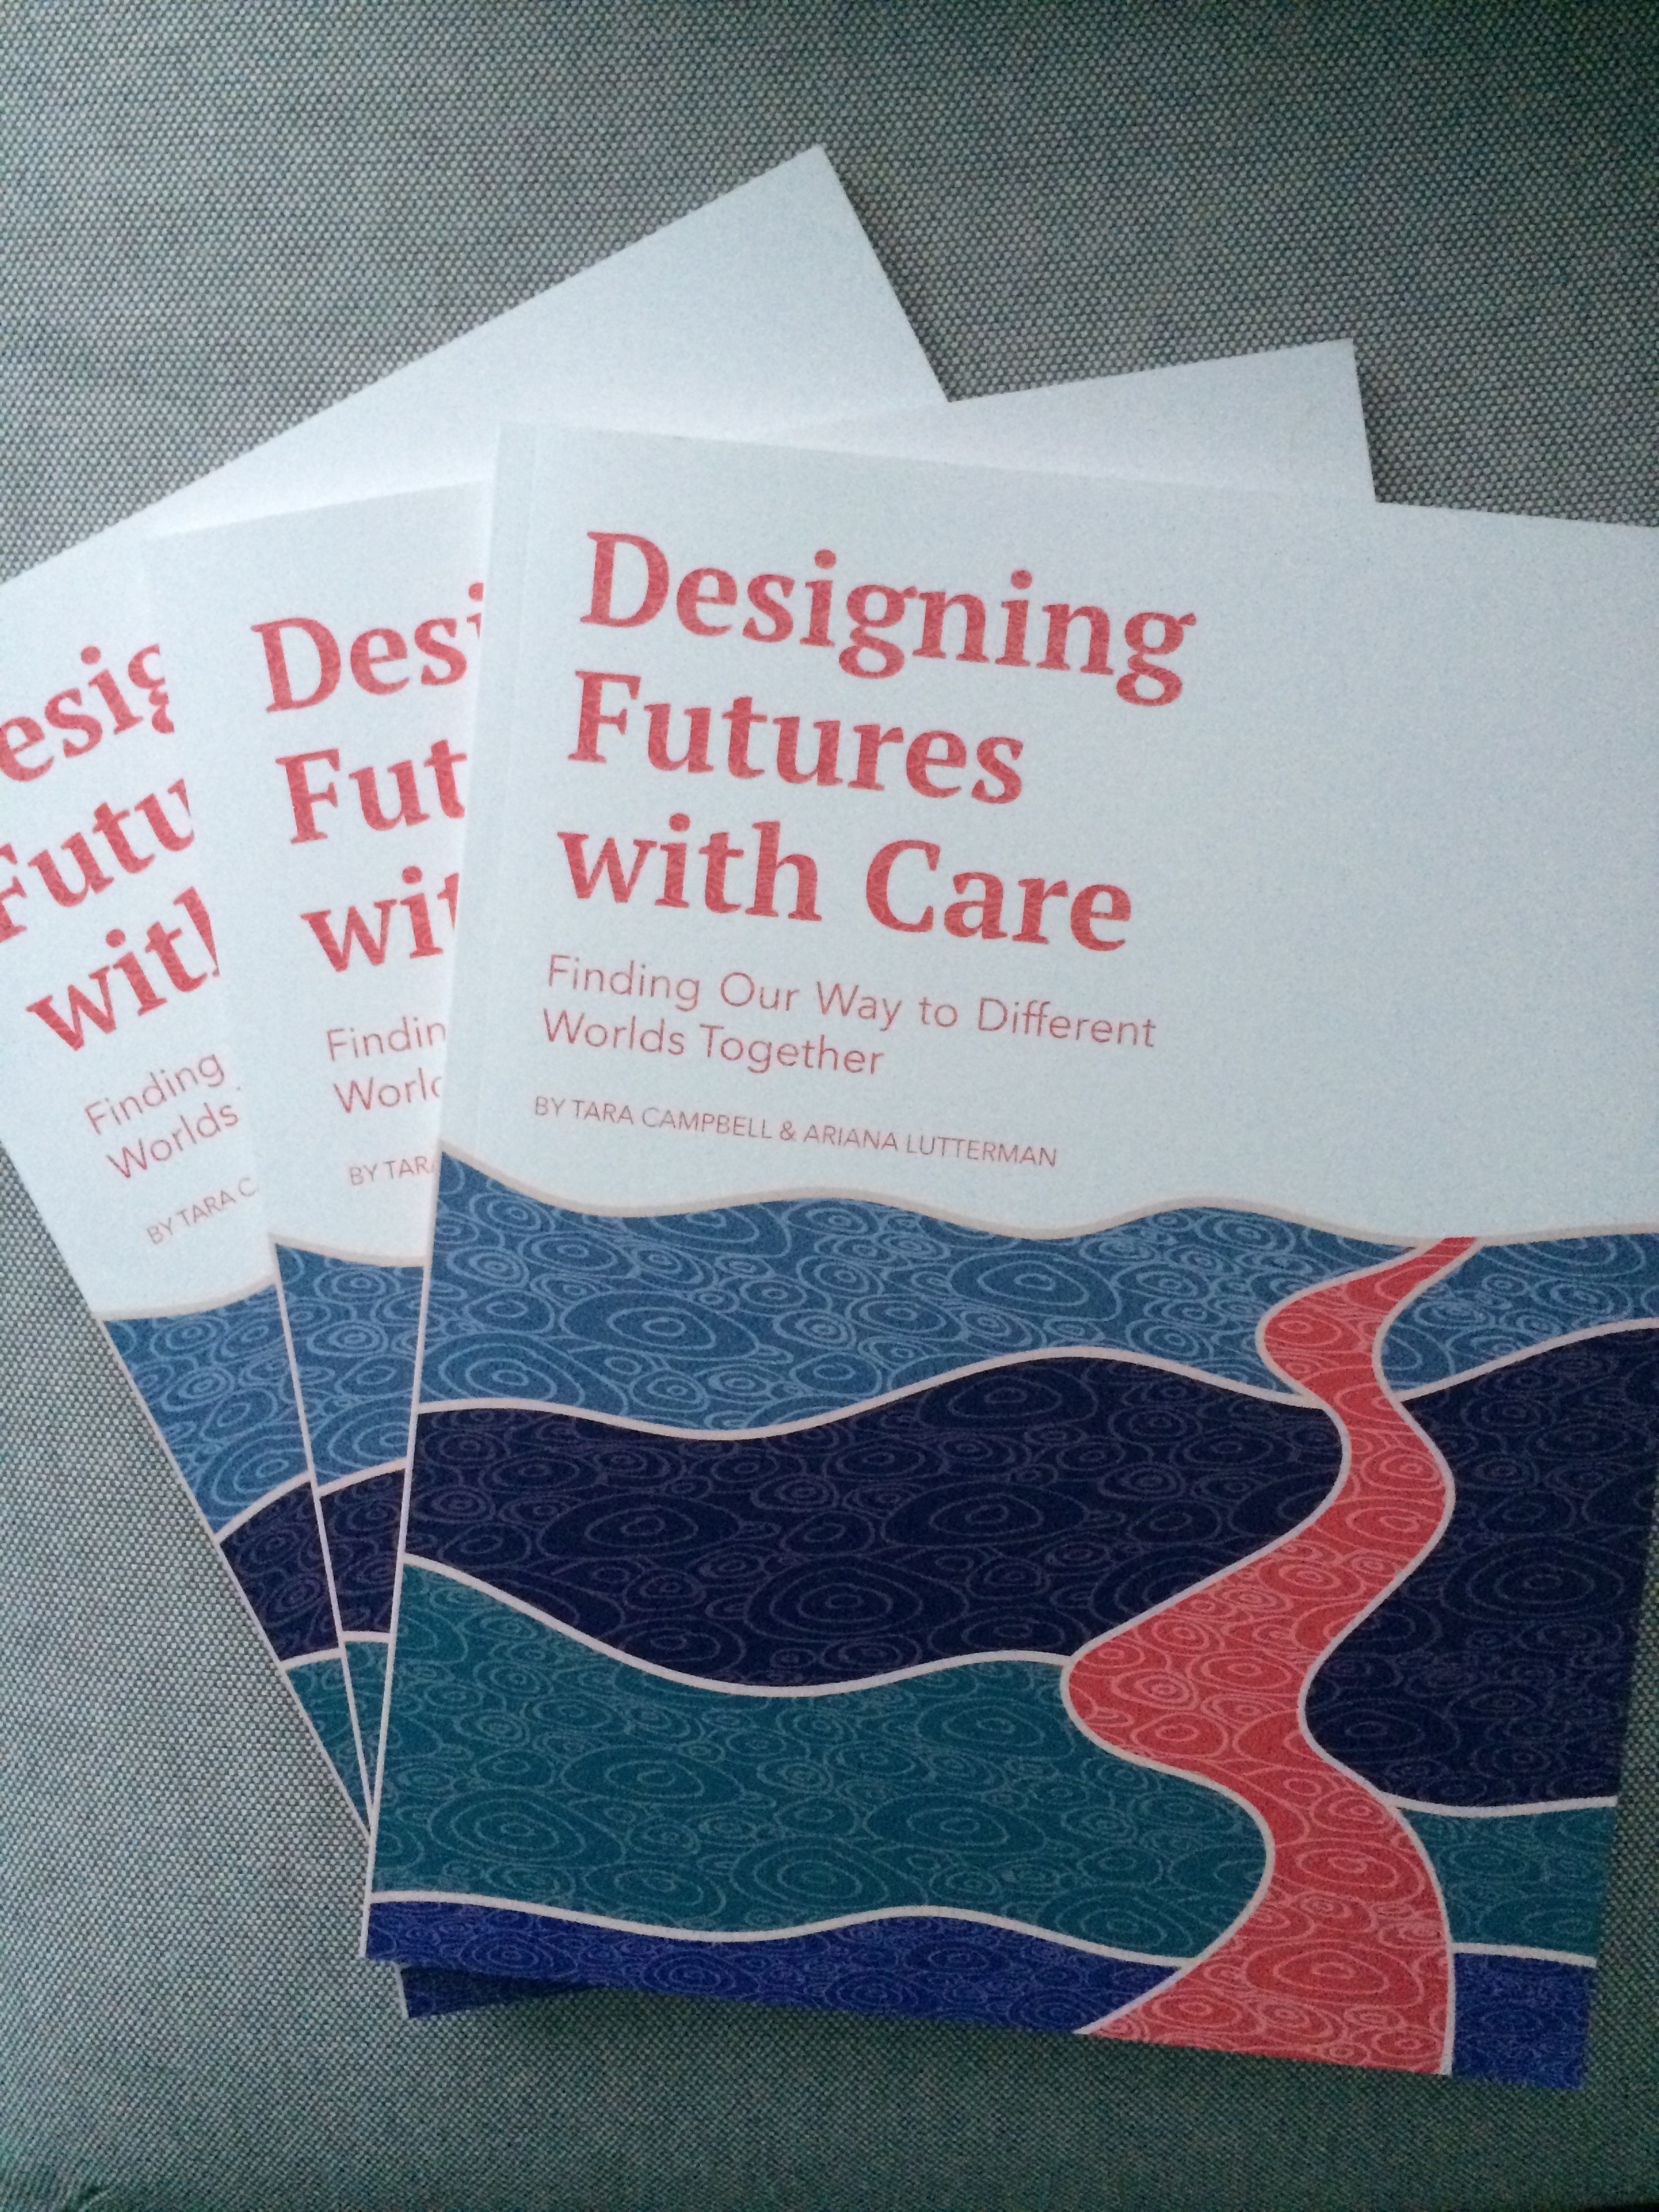 Designing Futures with Care: Finding Our Way to Different Worlds Together